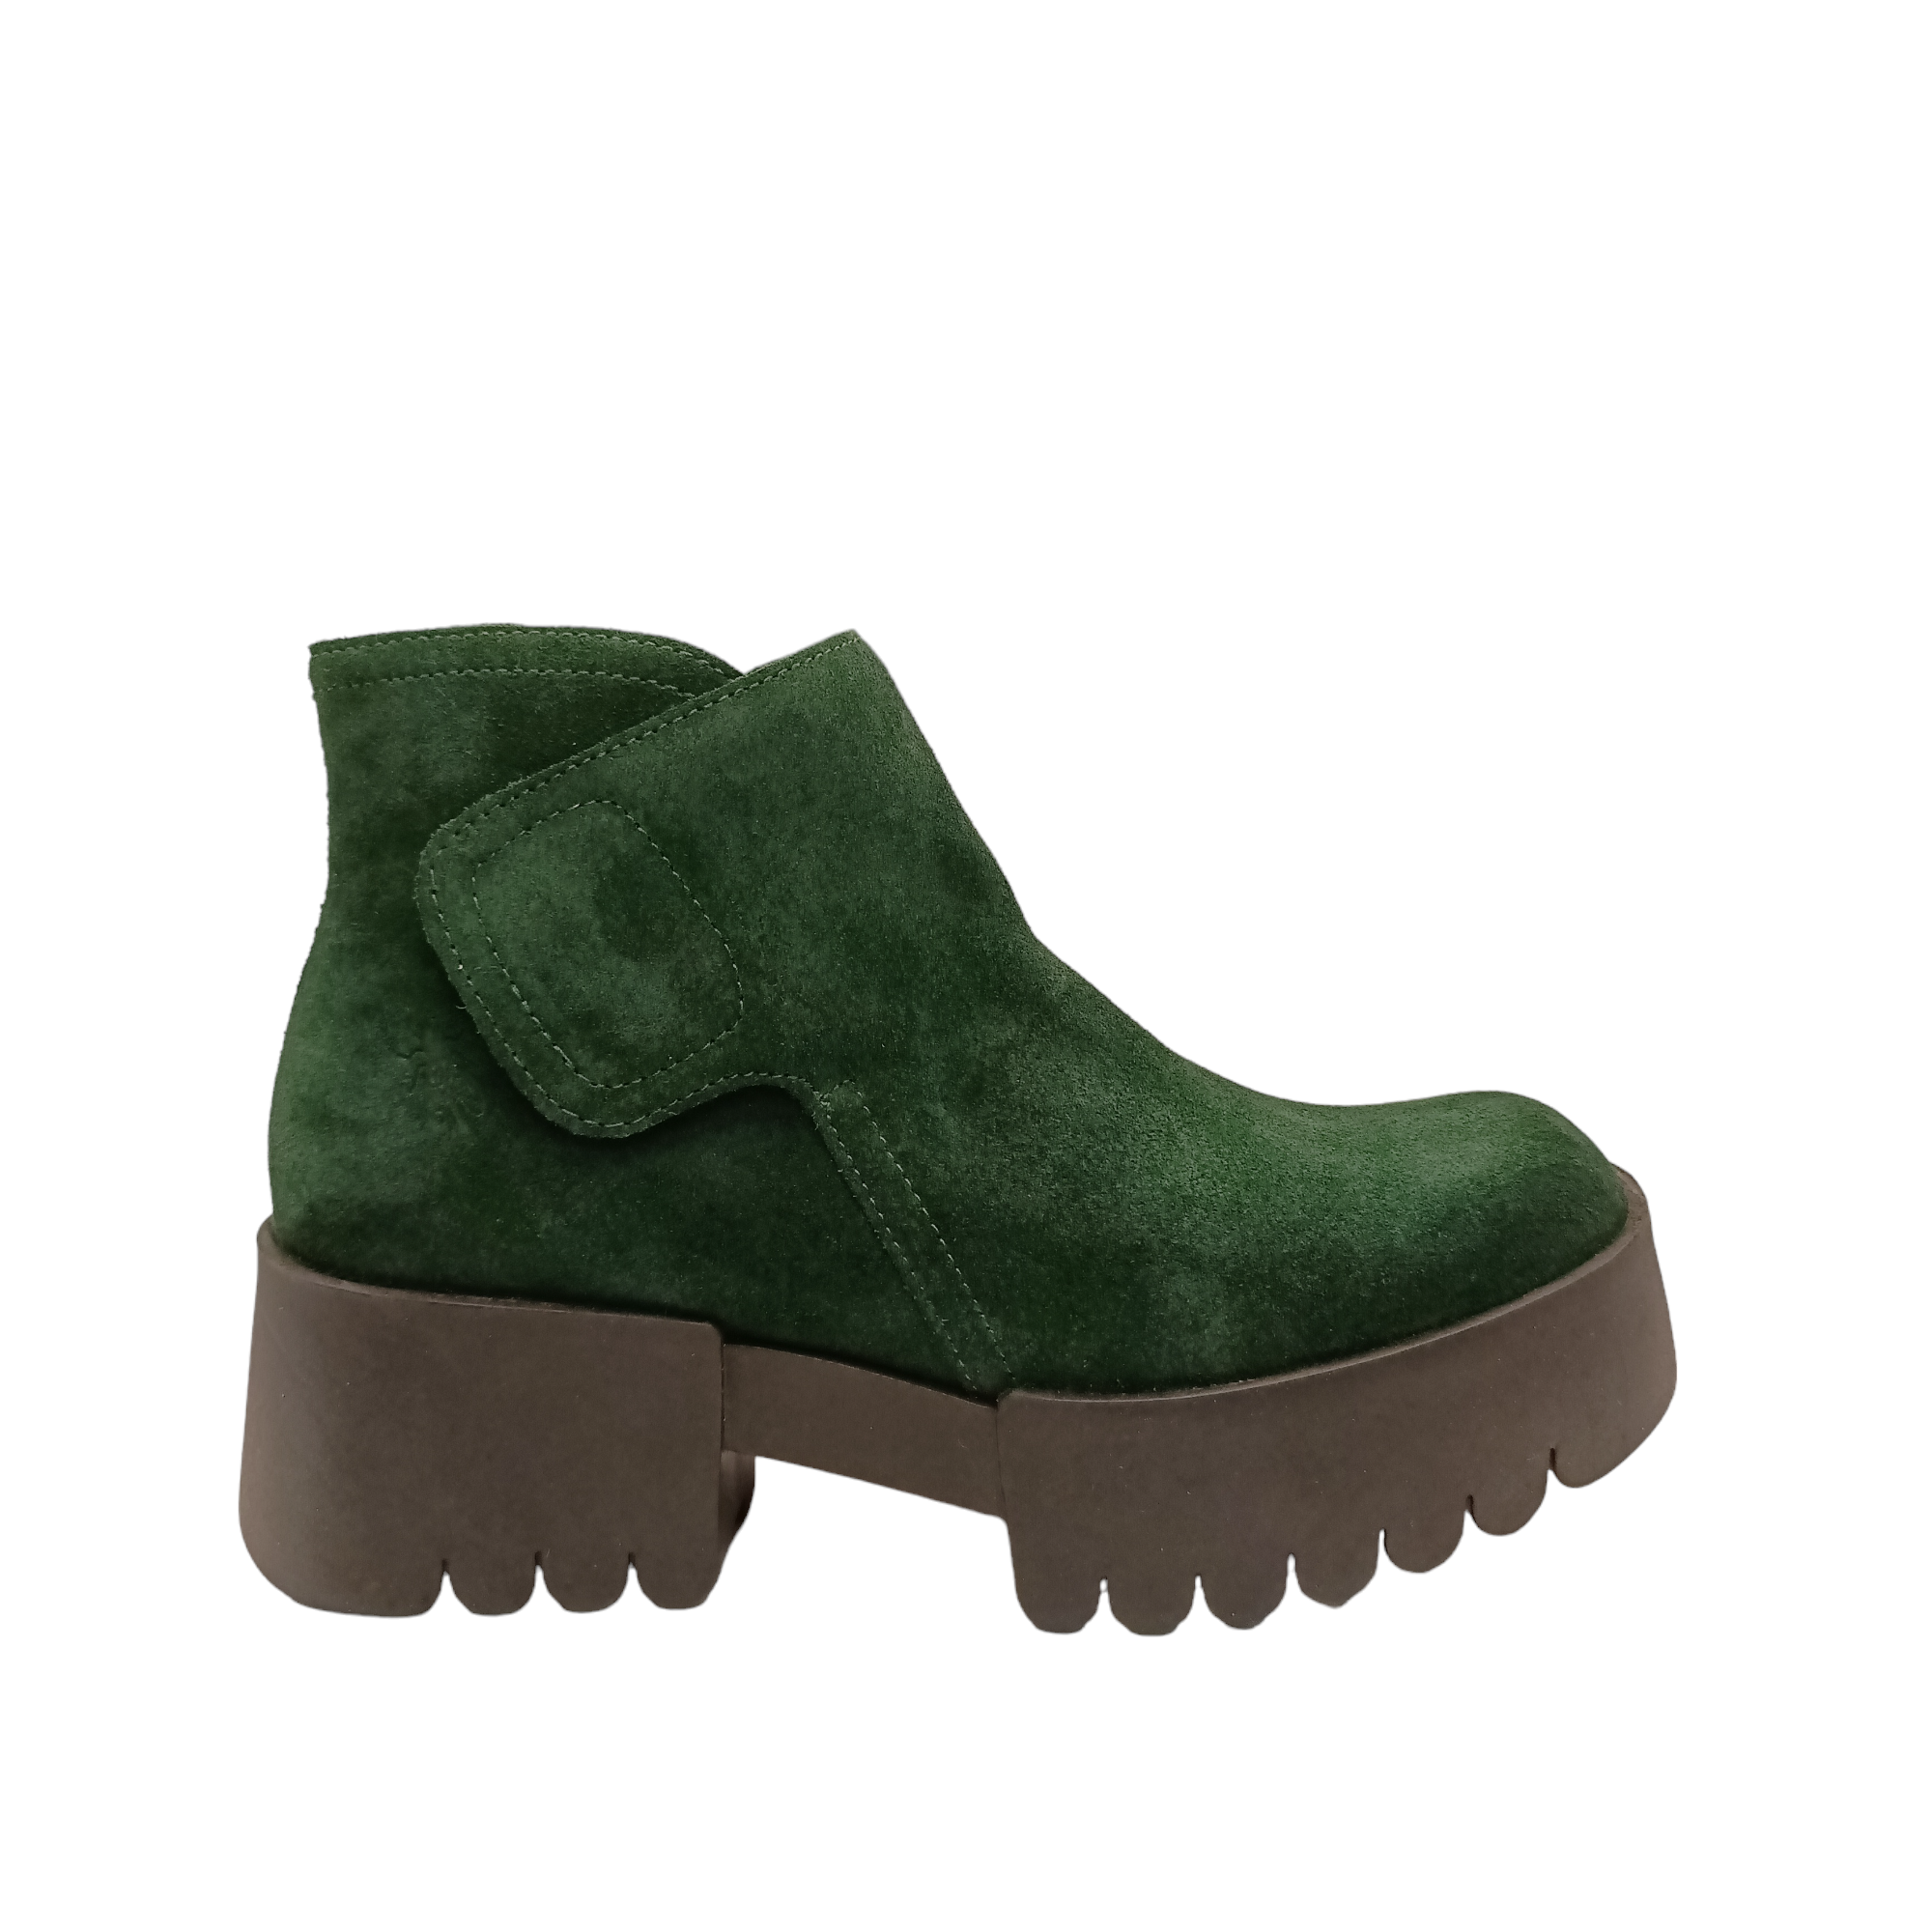 Shop Endo Fly London - with shoe&amp;me - from Fly London - Boots - Boot, Winter, Womens - [collection]